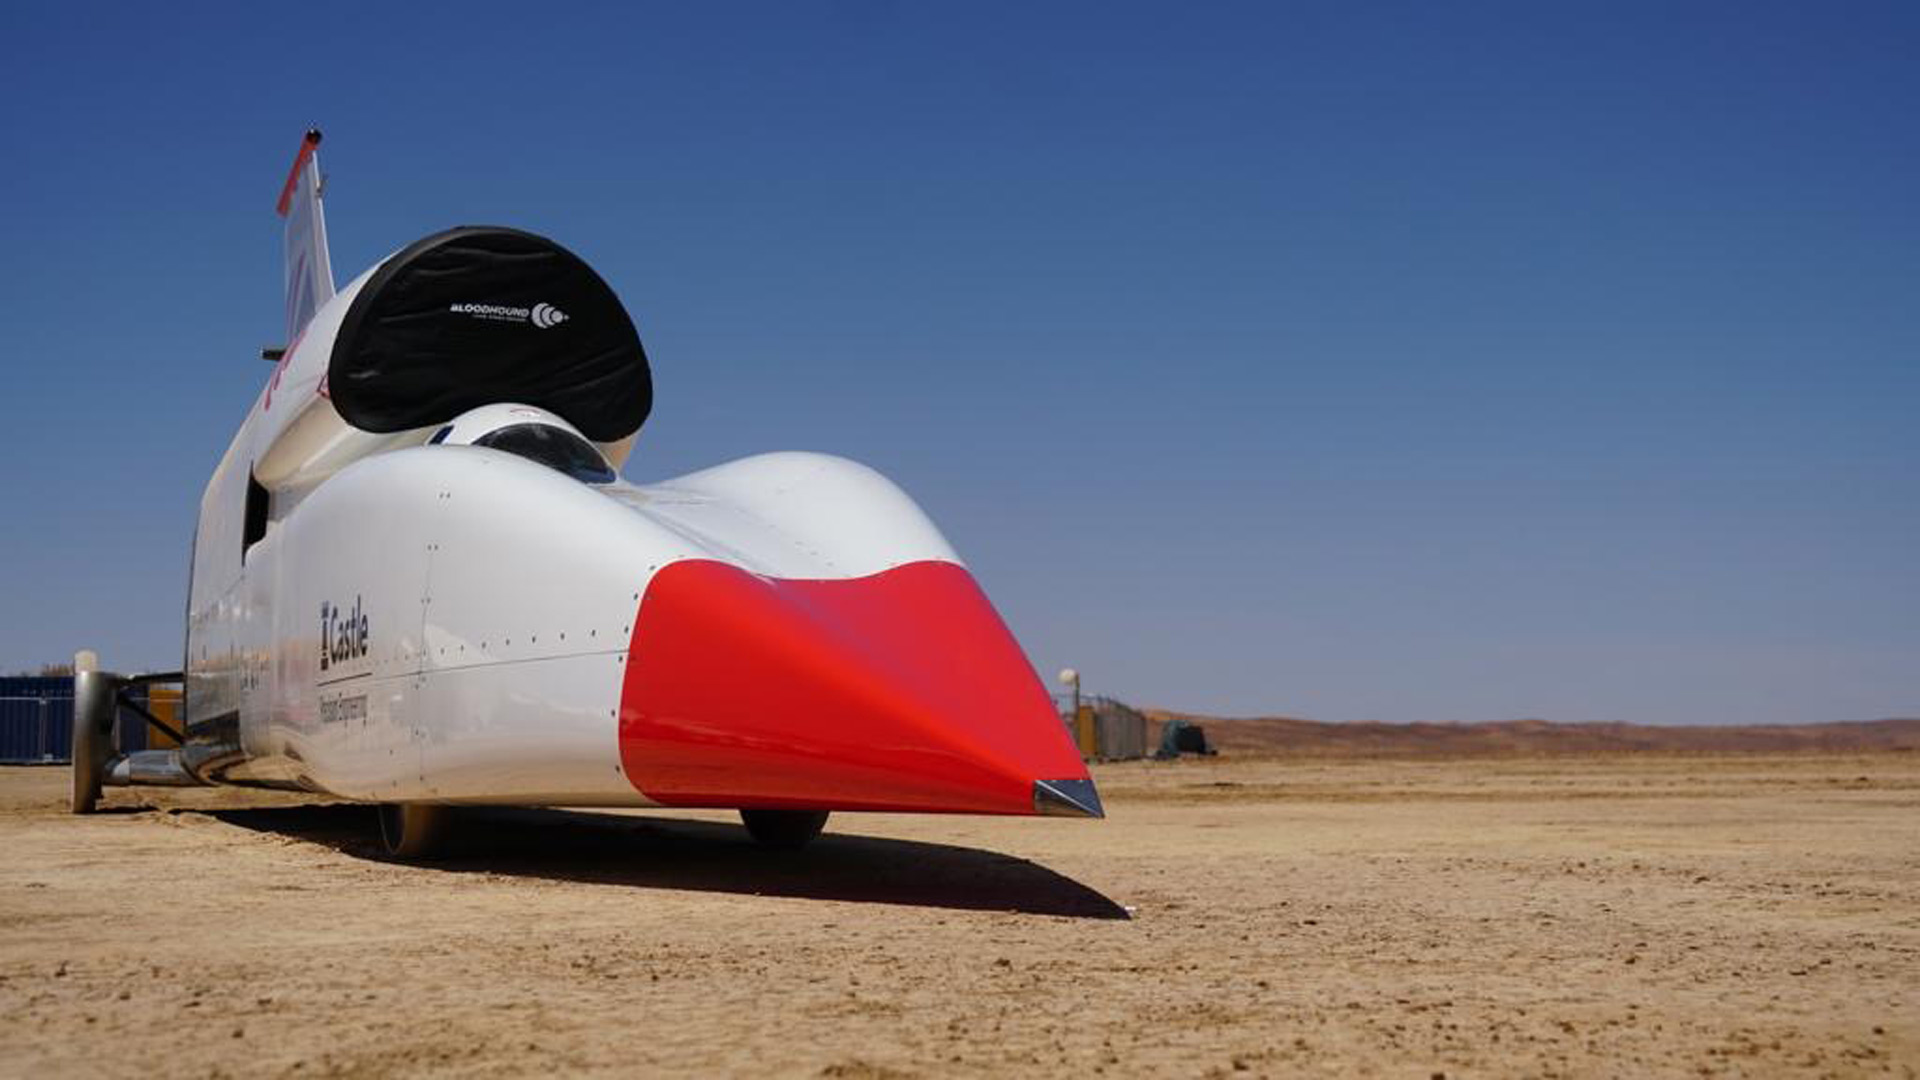 Bloodhound land speed record project switches to synthetic fuel Auto Recent